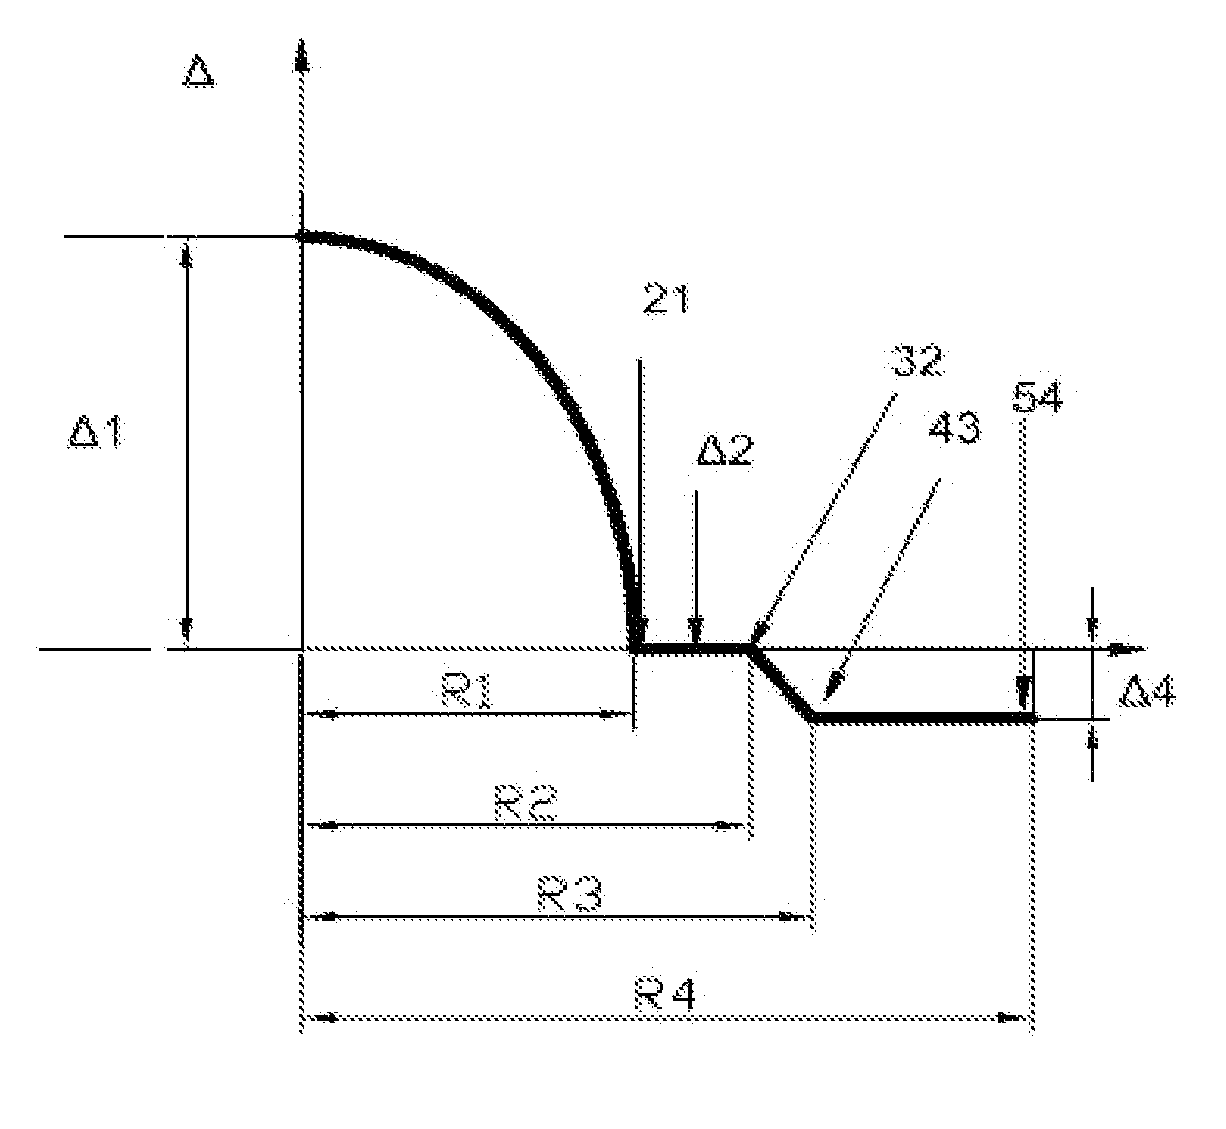 Multi-mode bending-resistant fiber and production method thereof